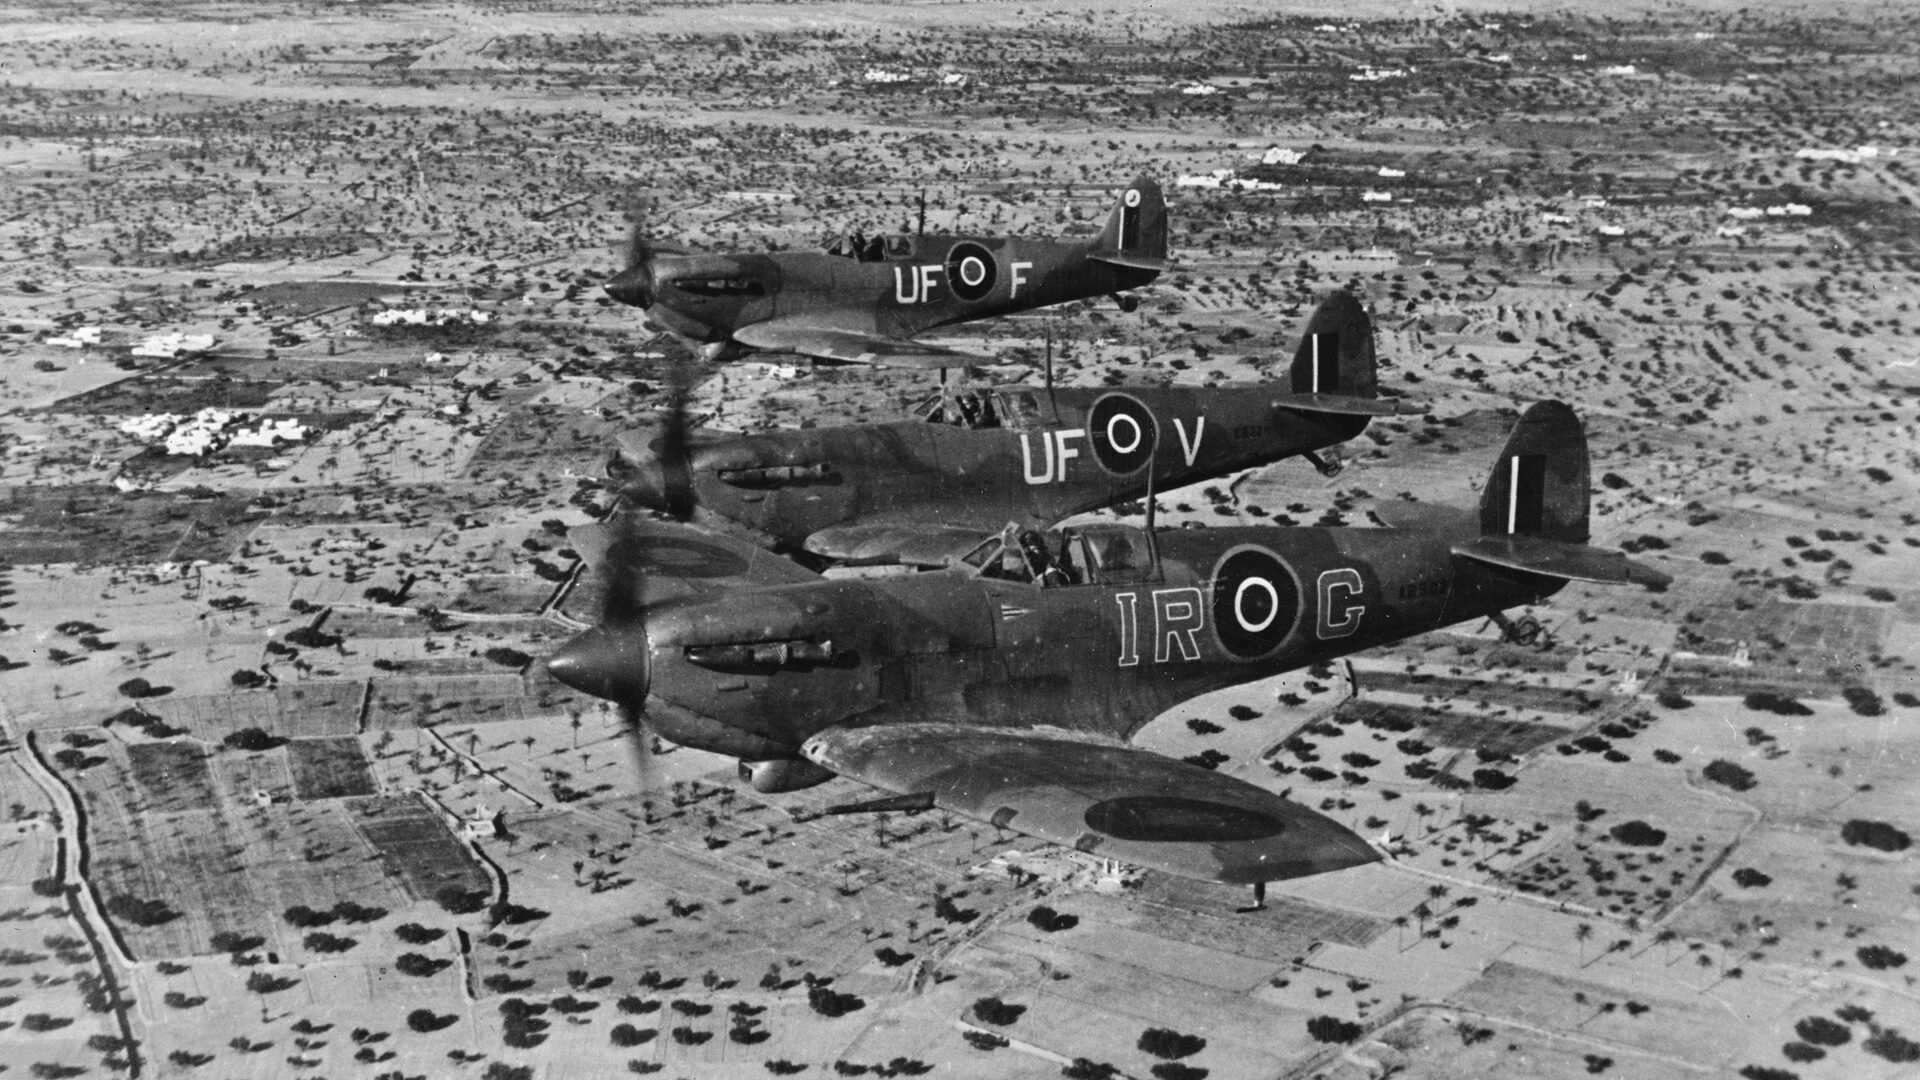 A Spitfire formation in North Africa in 1943. After the Battle of Britain, the single-seat Spitfire became the workhorse of the RAF Fighter Command, proving itself versatile in a variety of roles, including interceptor, reconnaissance, and ground attack.